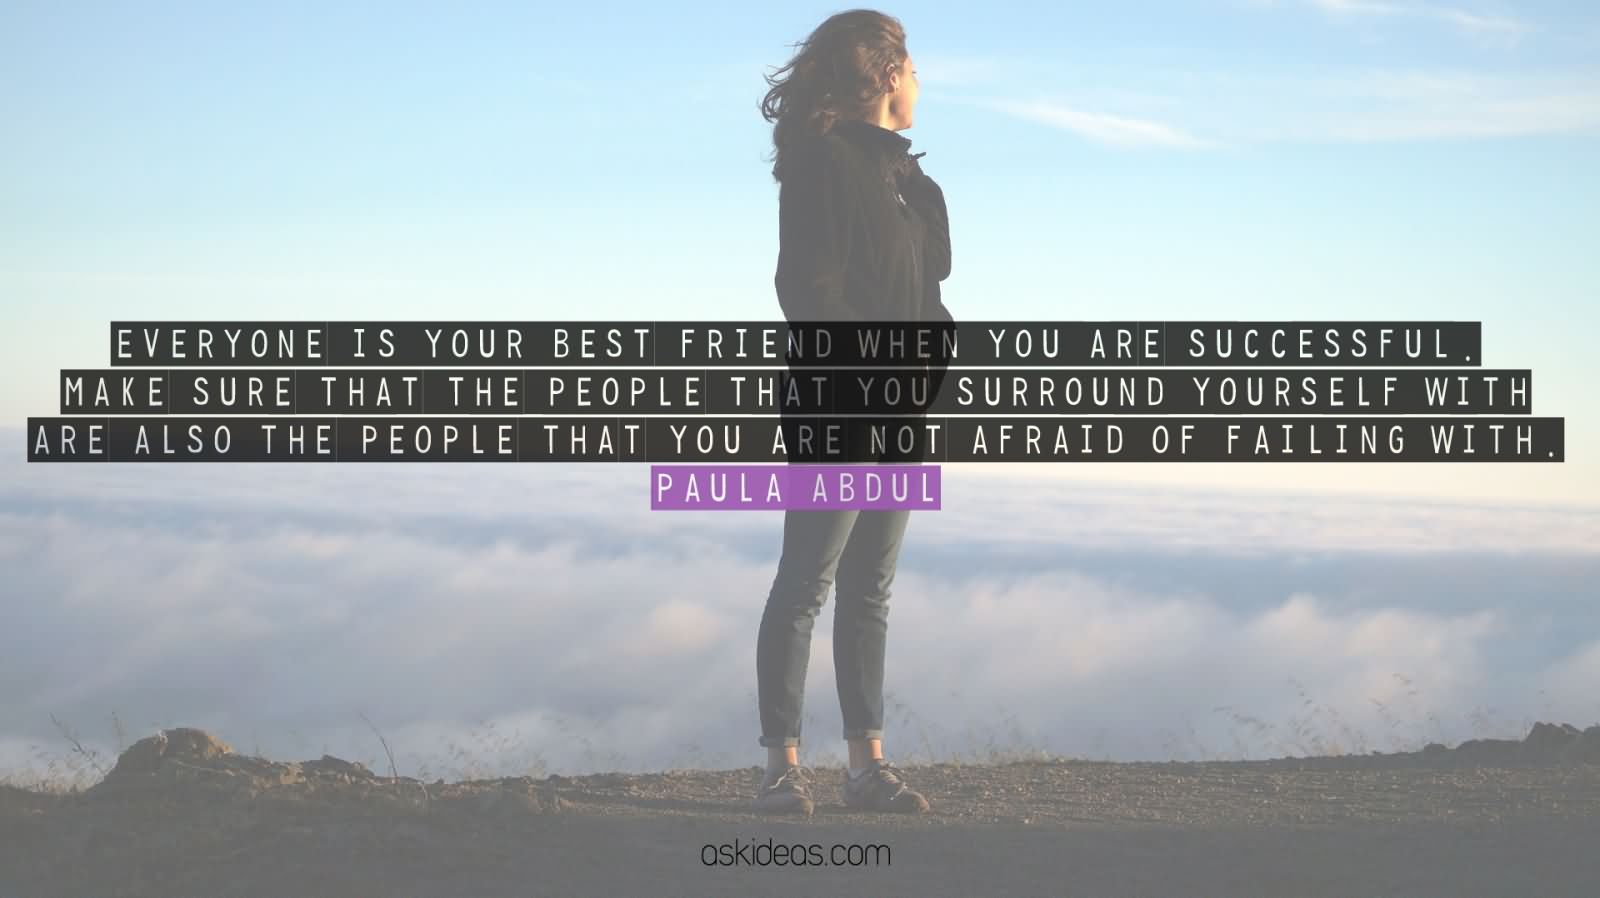 Everyone is your best friend when you are successful. Make sure that the people that you surround yourself with are also the people that you are not afraid of failing with. Paula Abdul